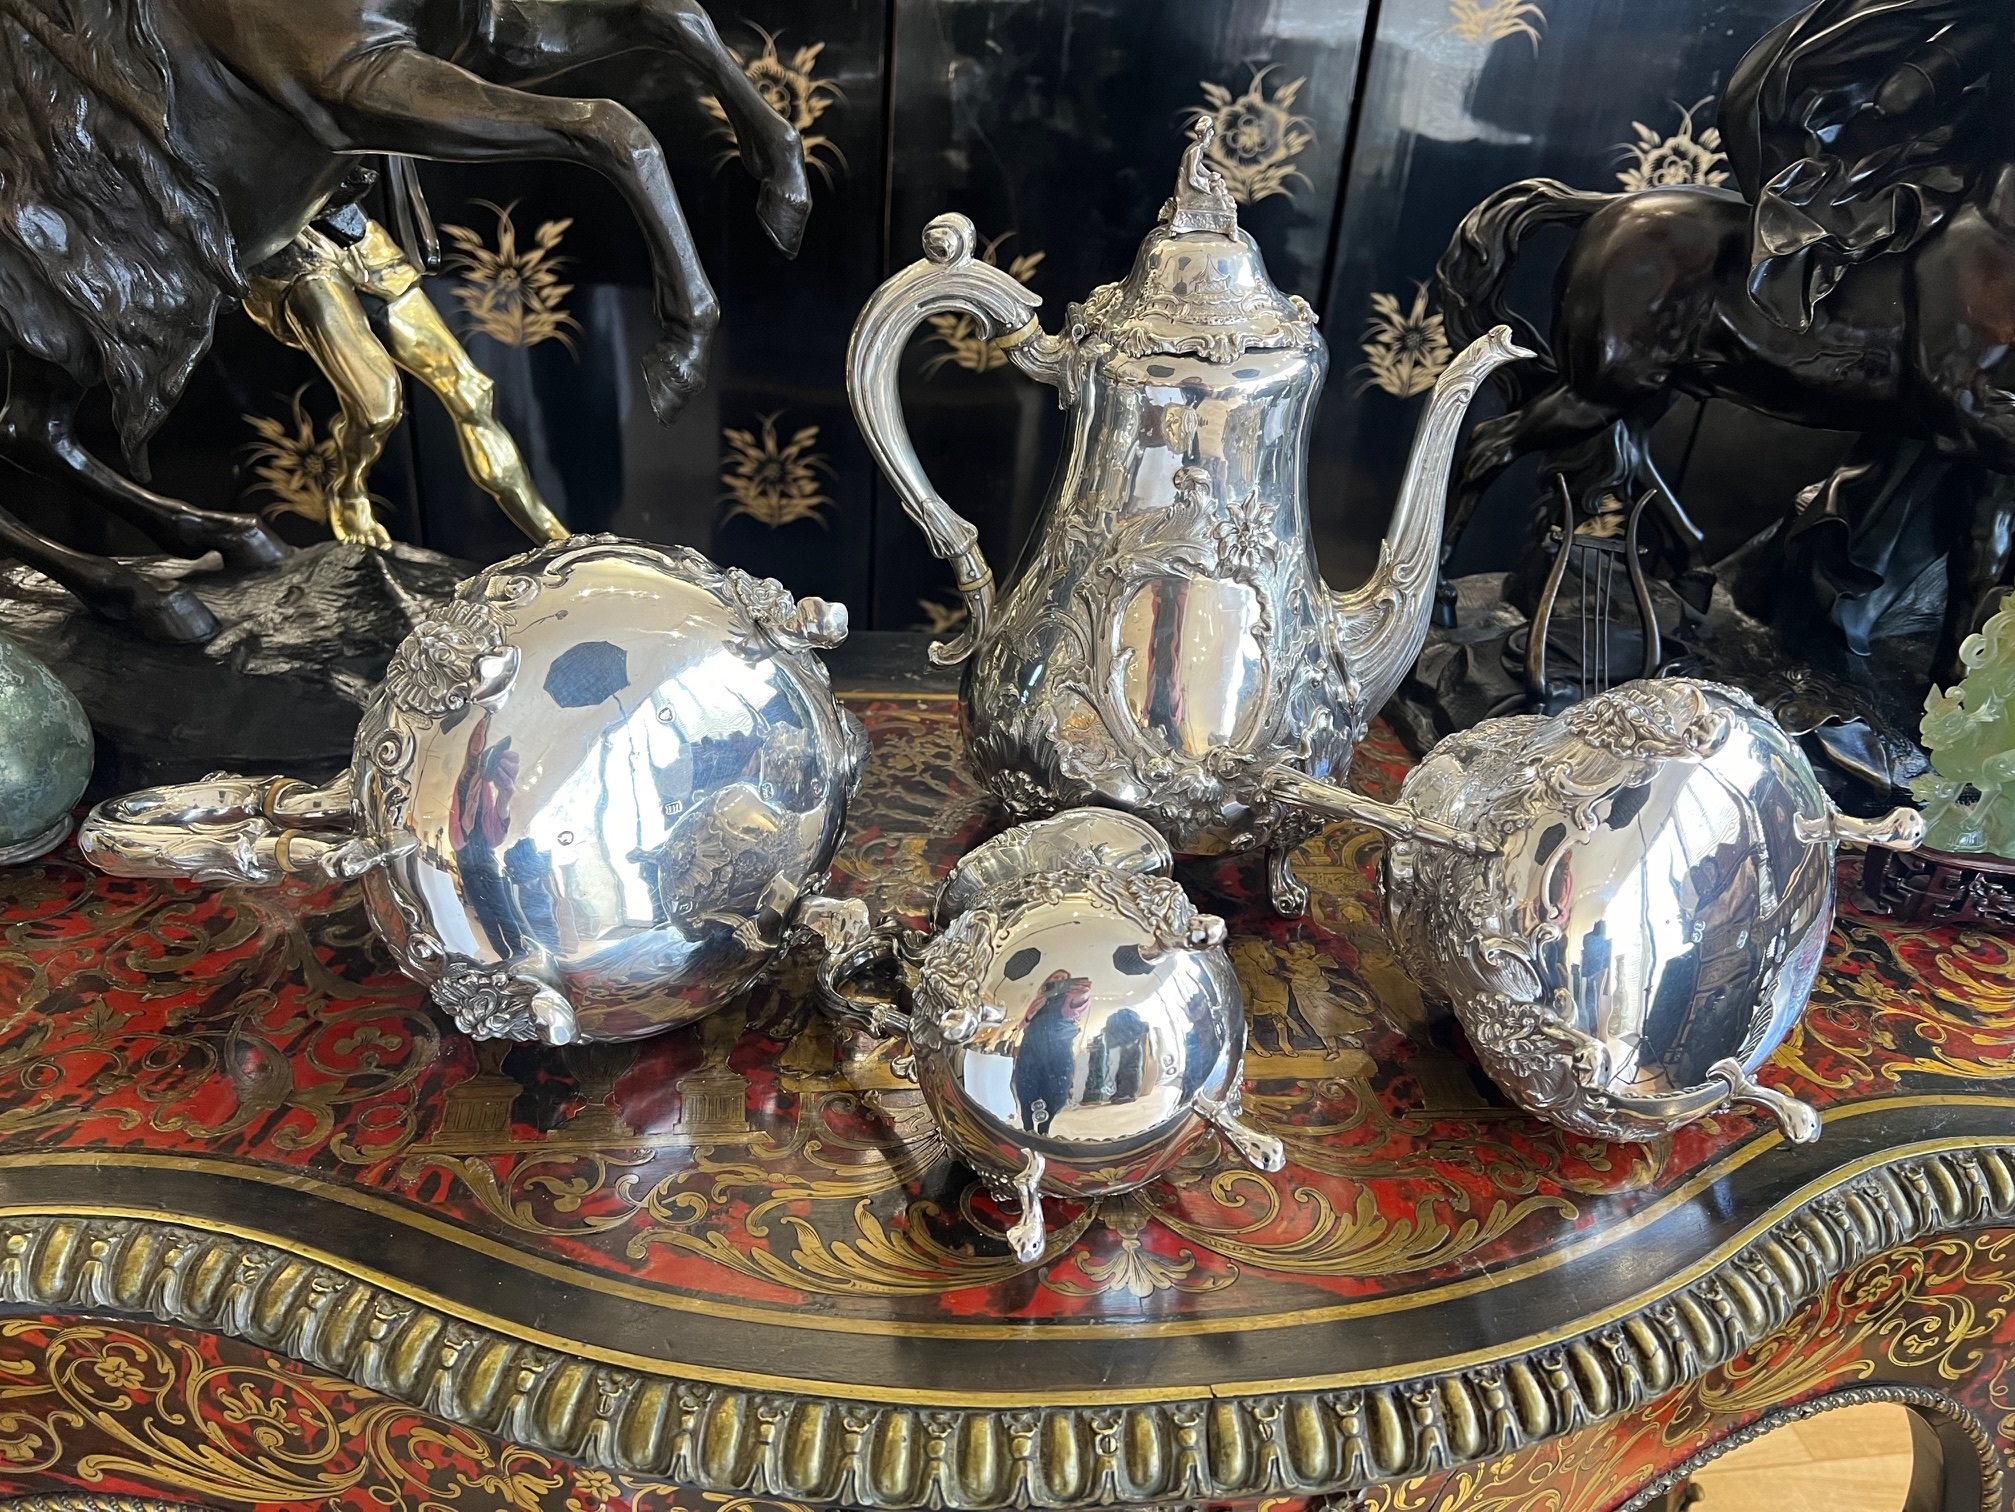 A RARE 19TH CENTURY SILVER TEA AND COFFEE SET WITH SCENES OF TEA AND COFFEE PRODUCTION - Image 9 of 17